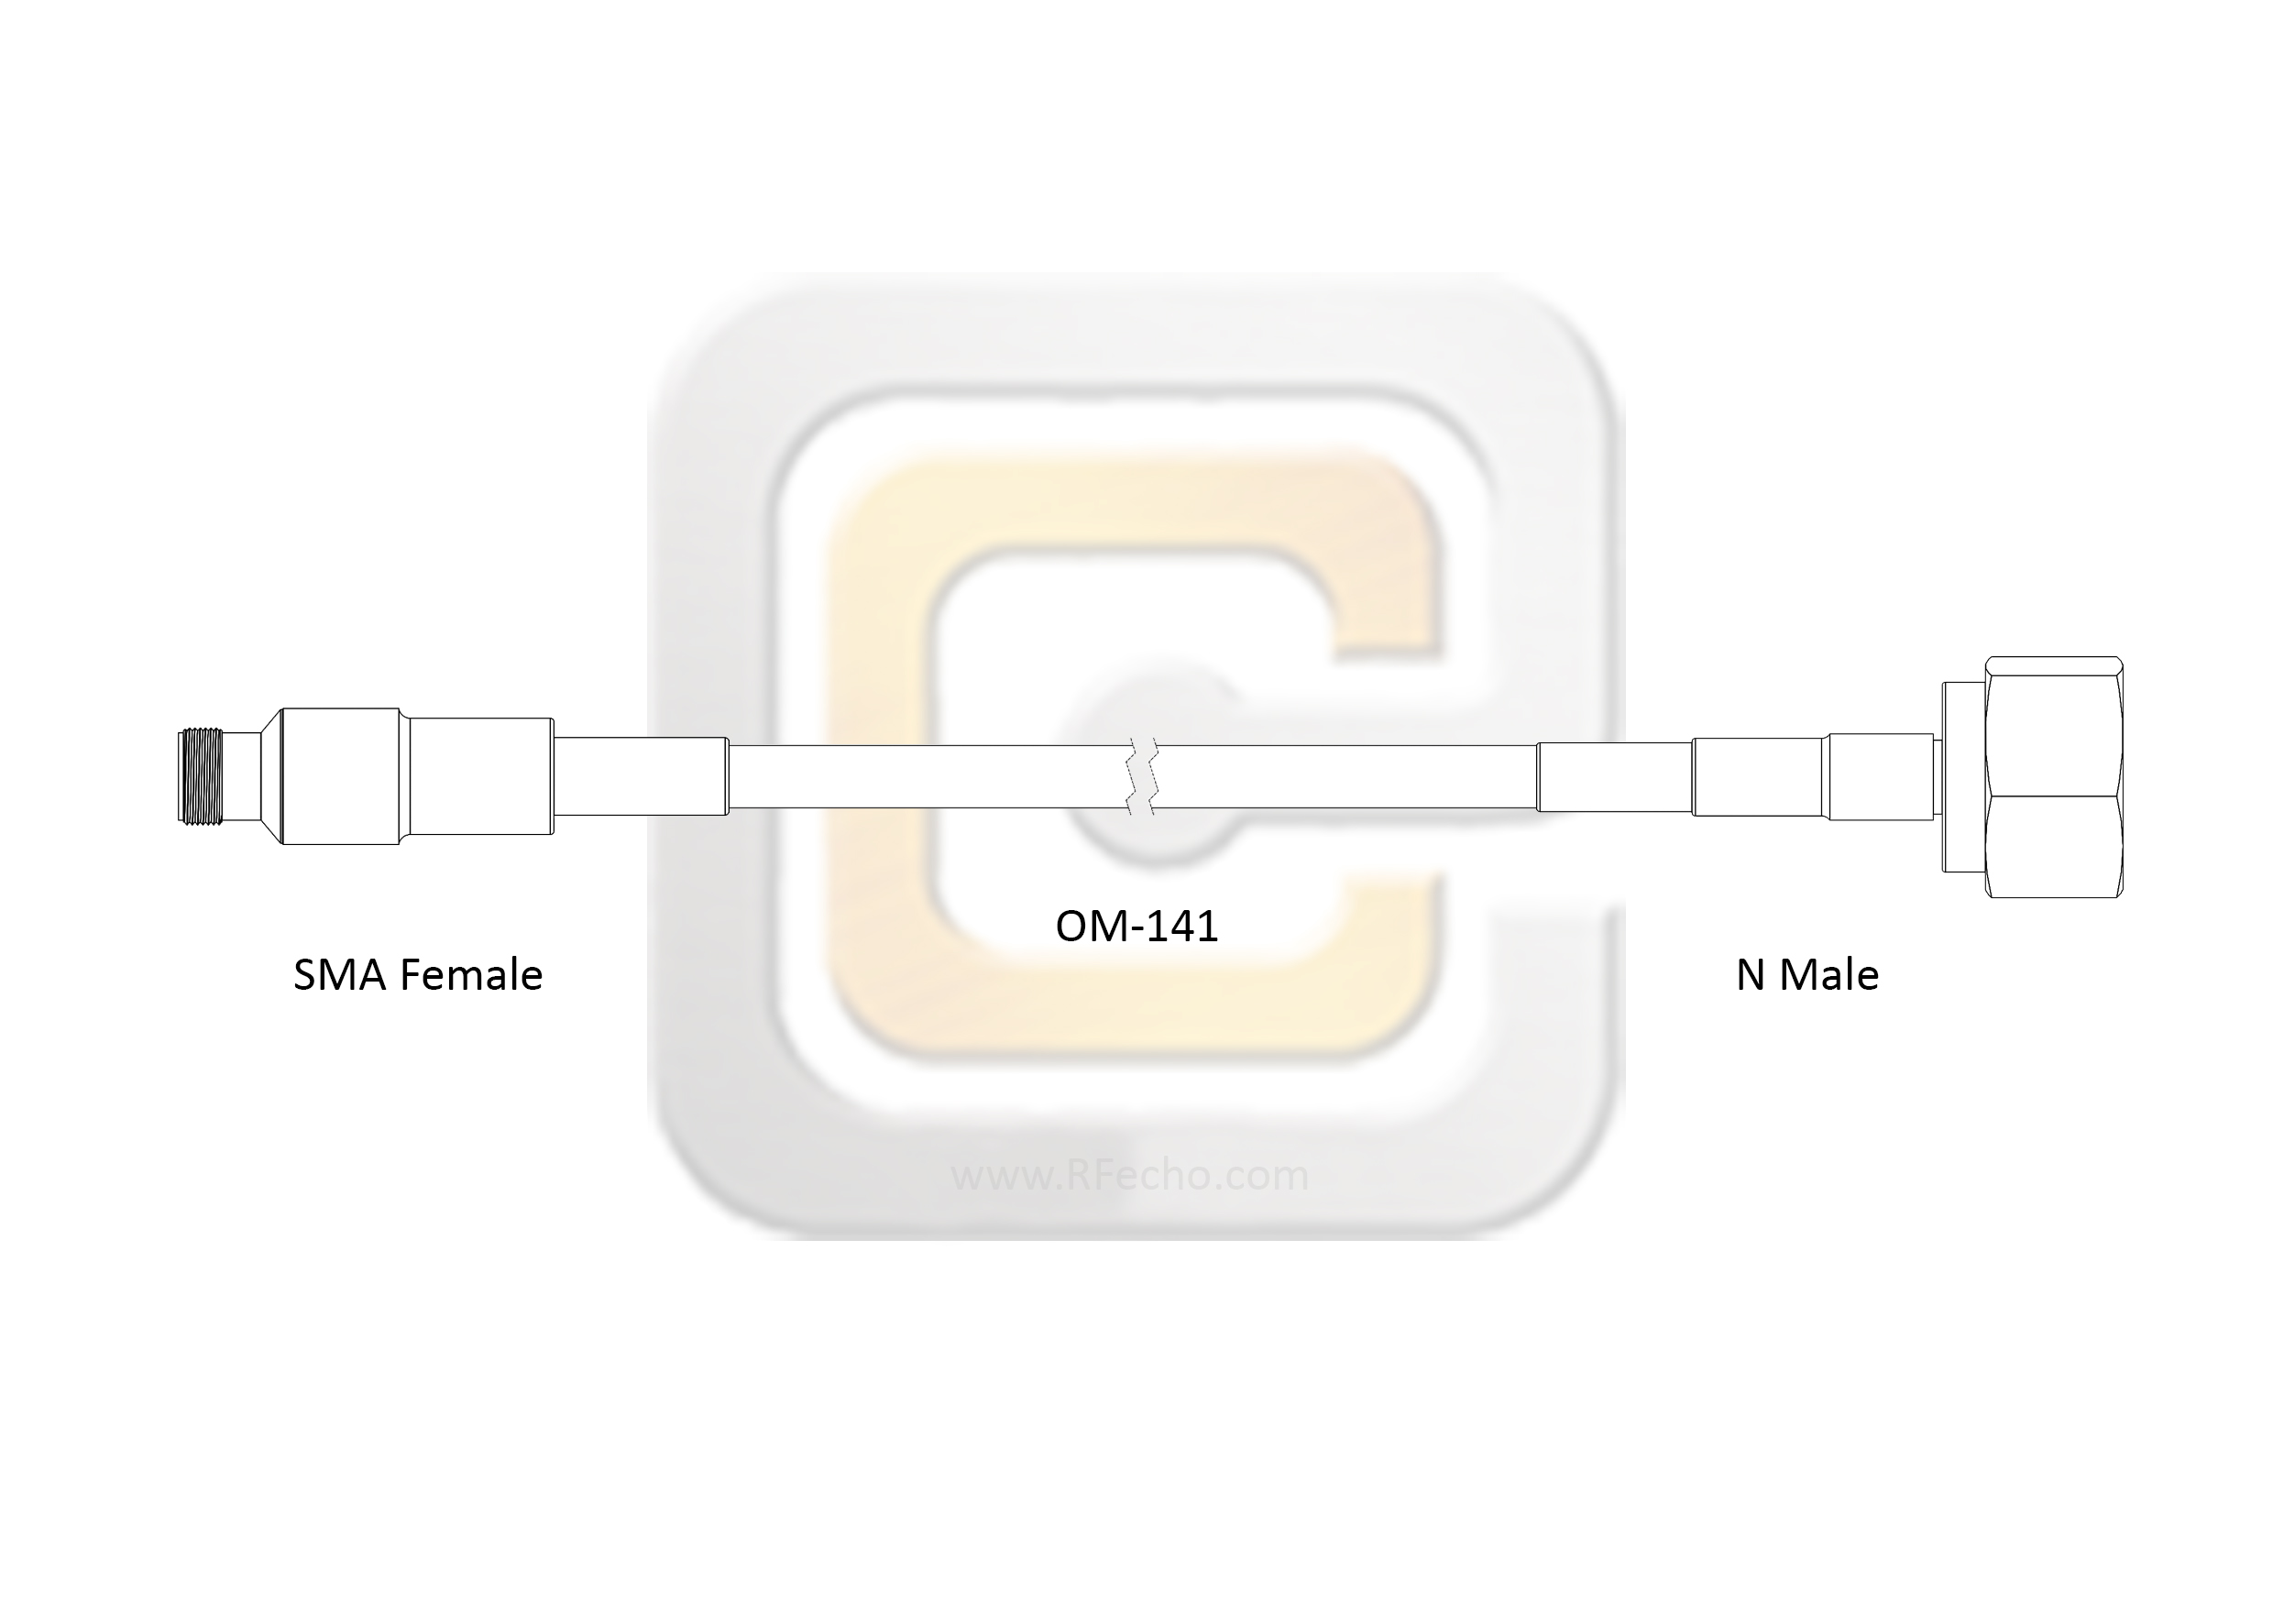 SMA Female to N Male, 18 GHz,  OM-141 Coax and RoHS